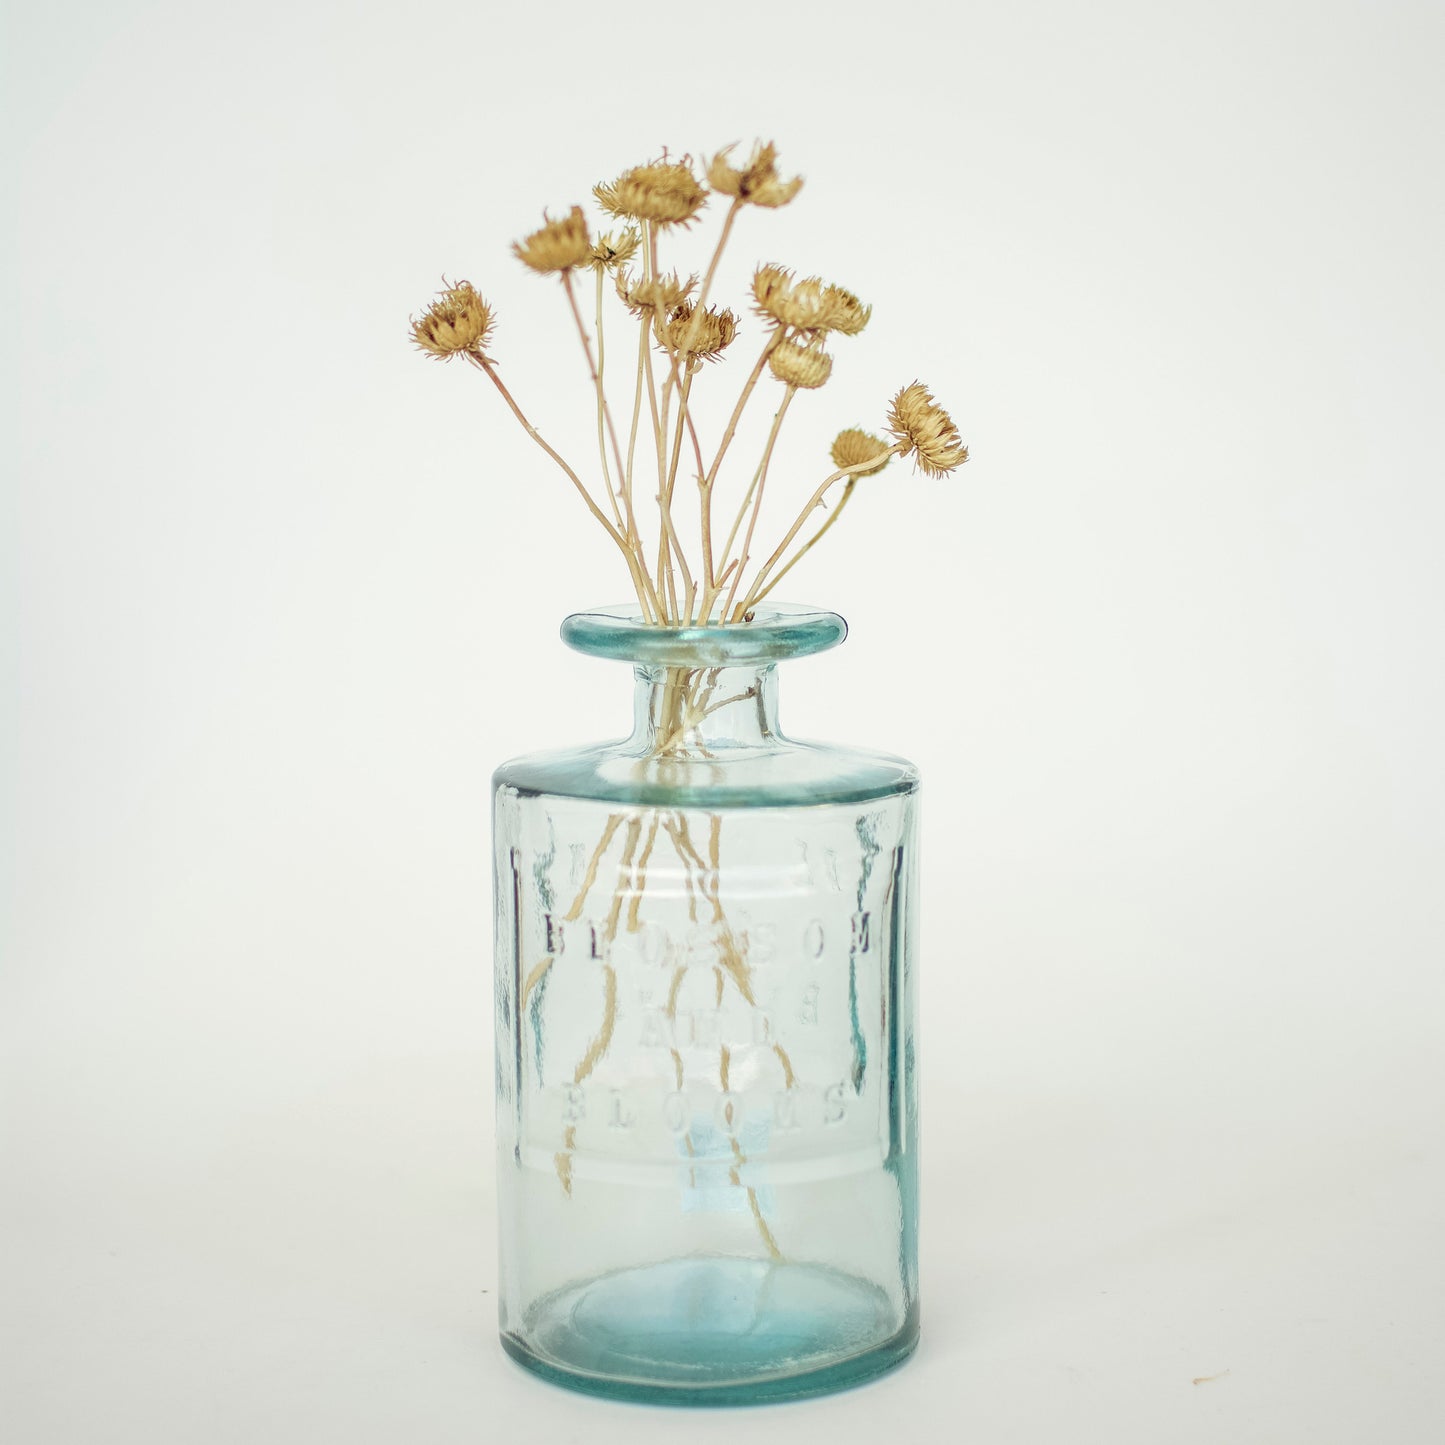 Recycled Glass Vase